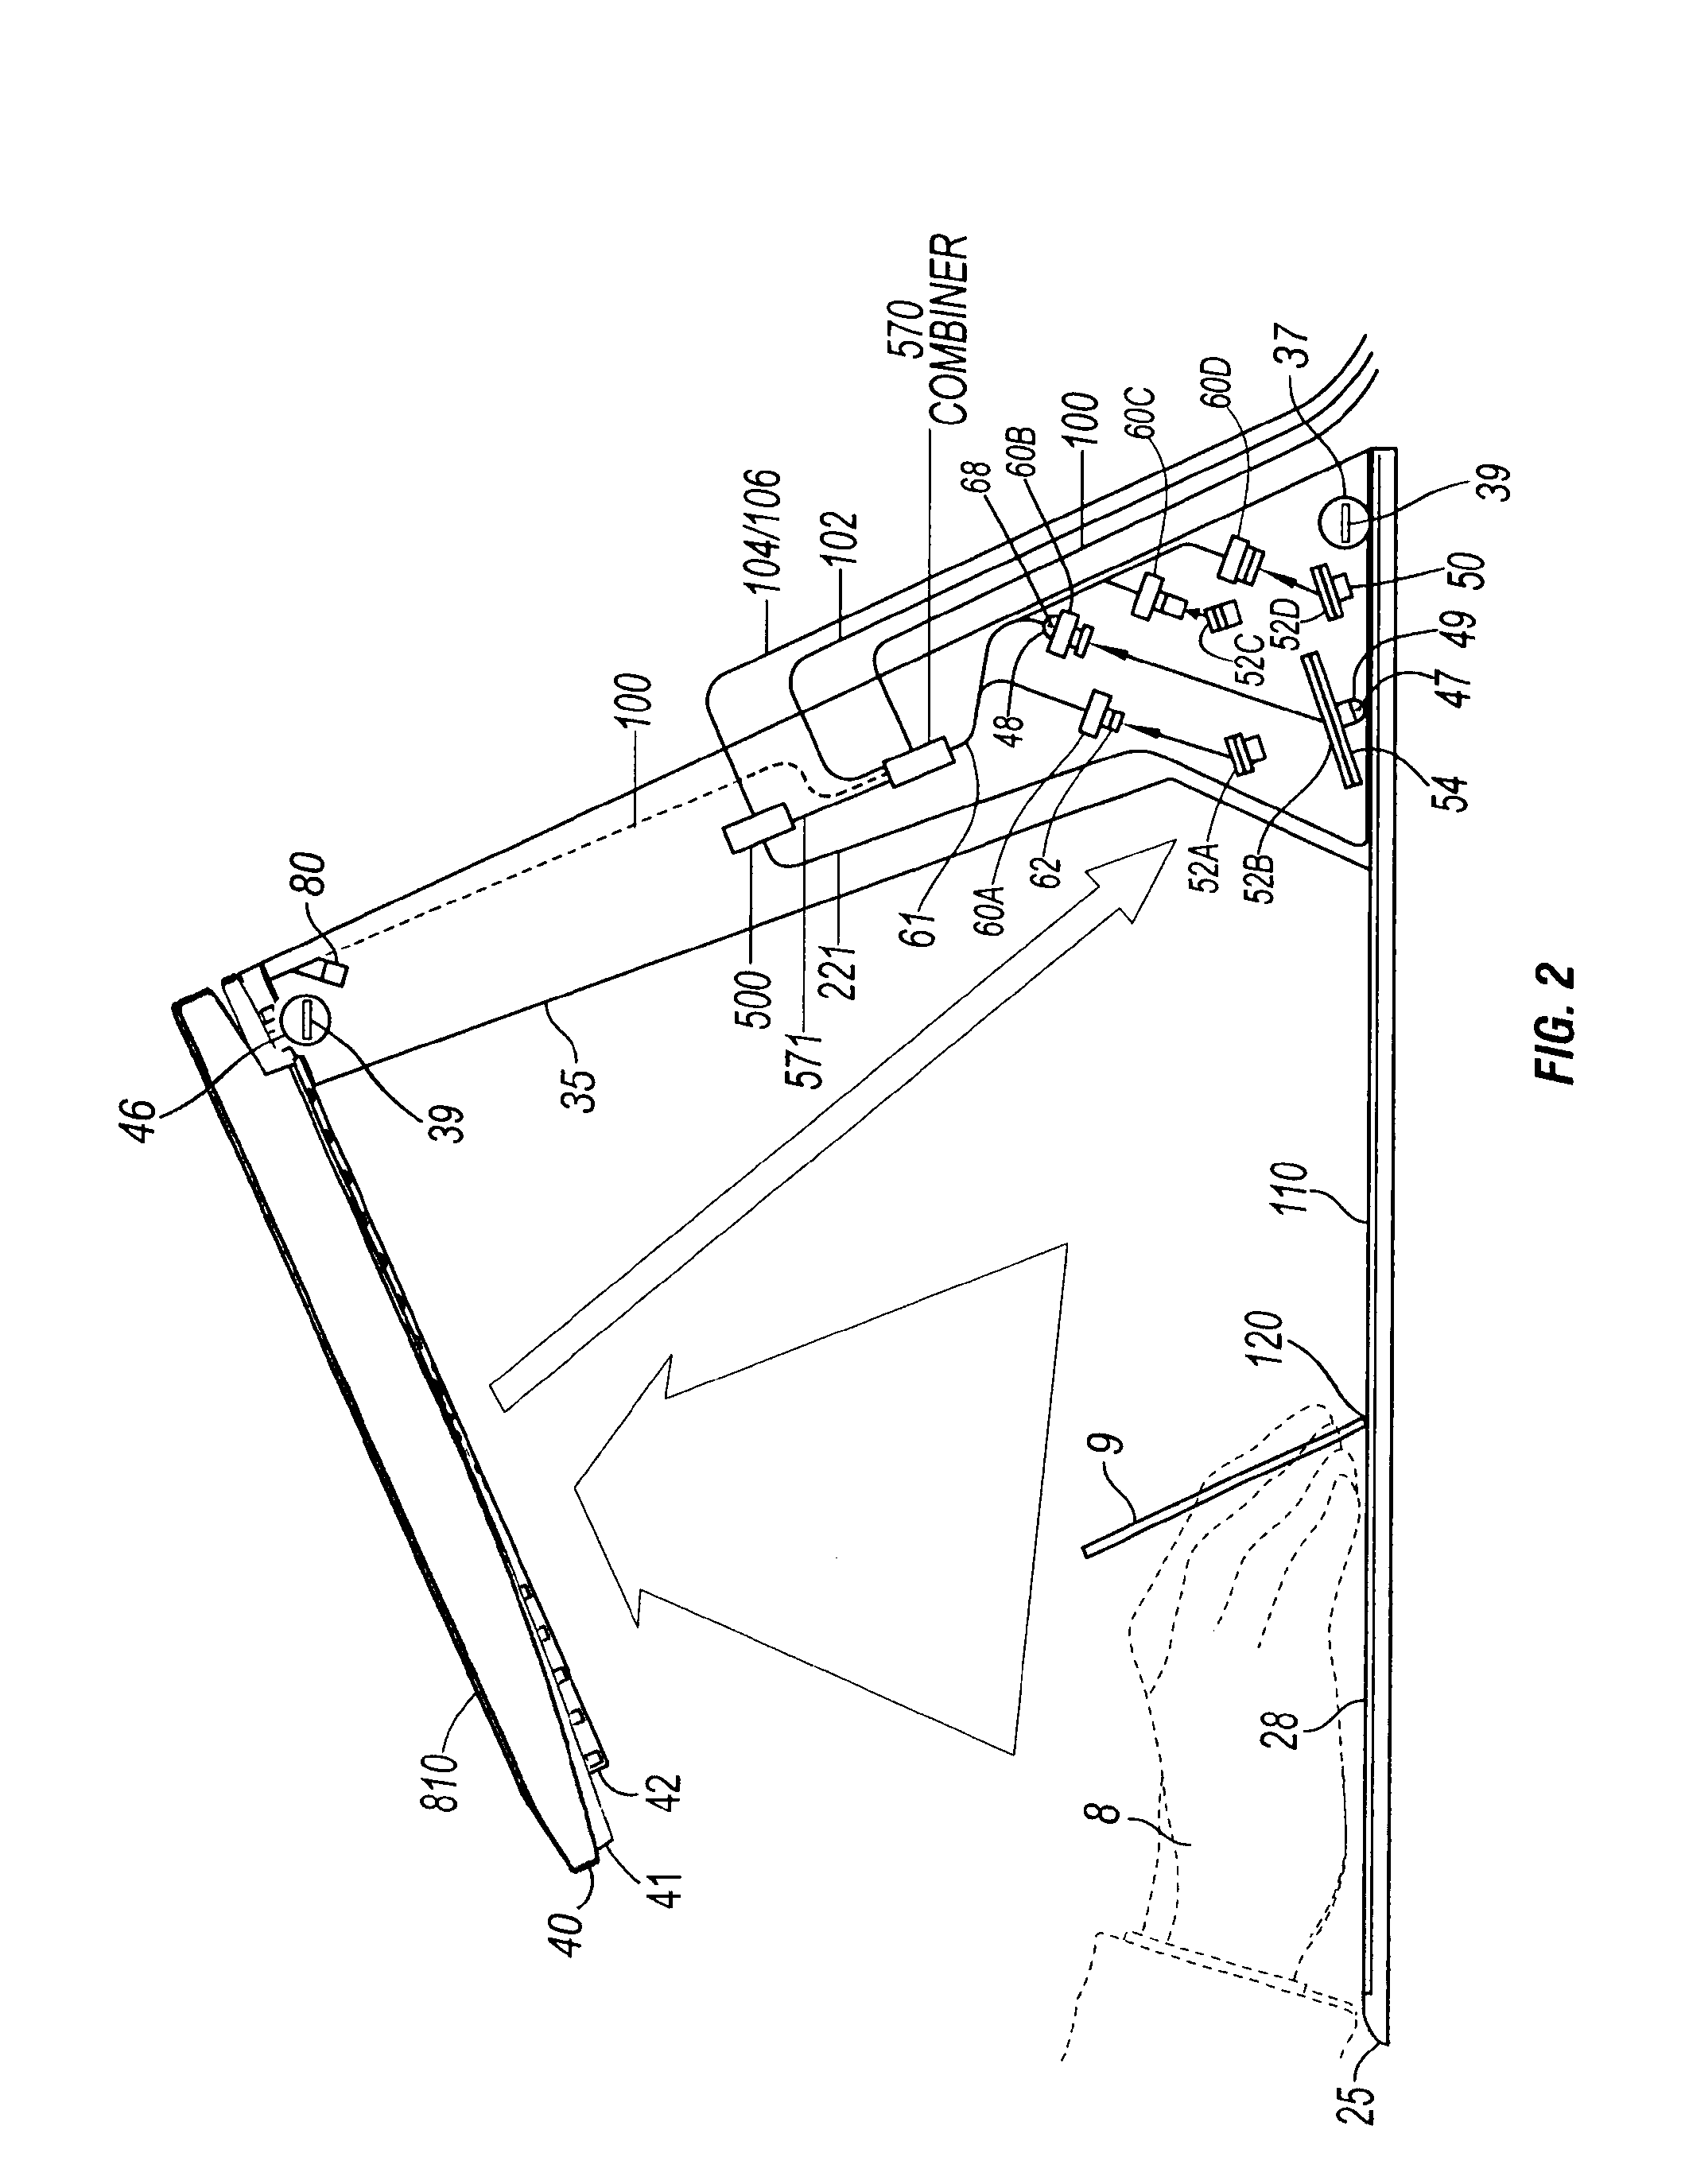 Input cueing emersion system and method